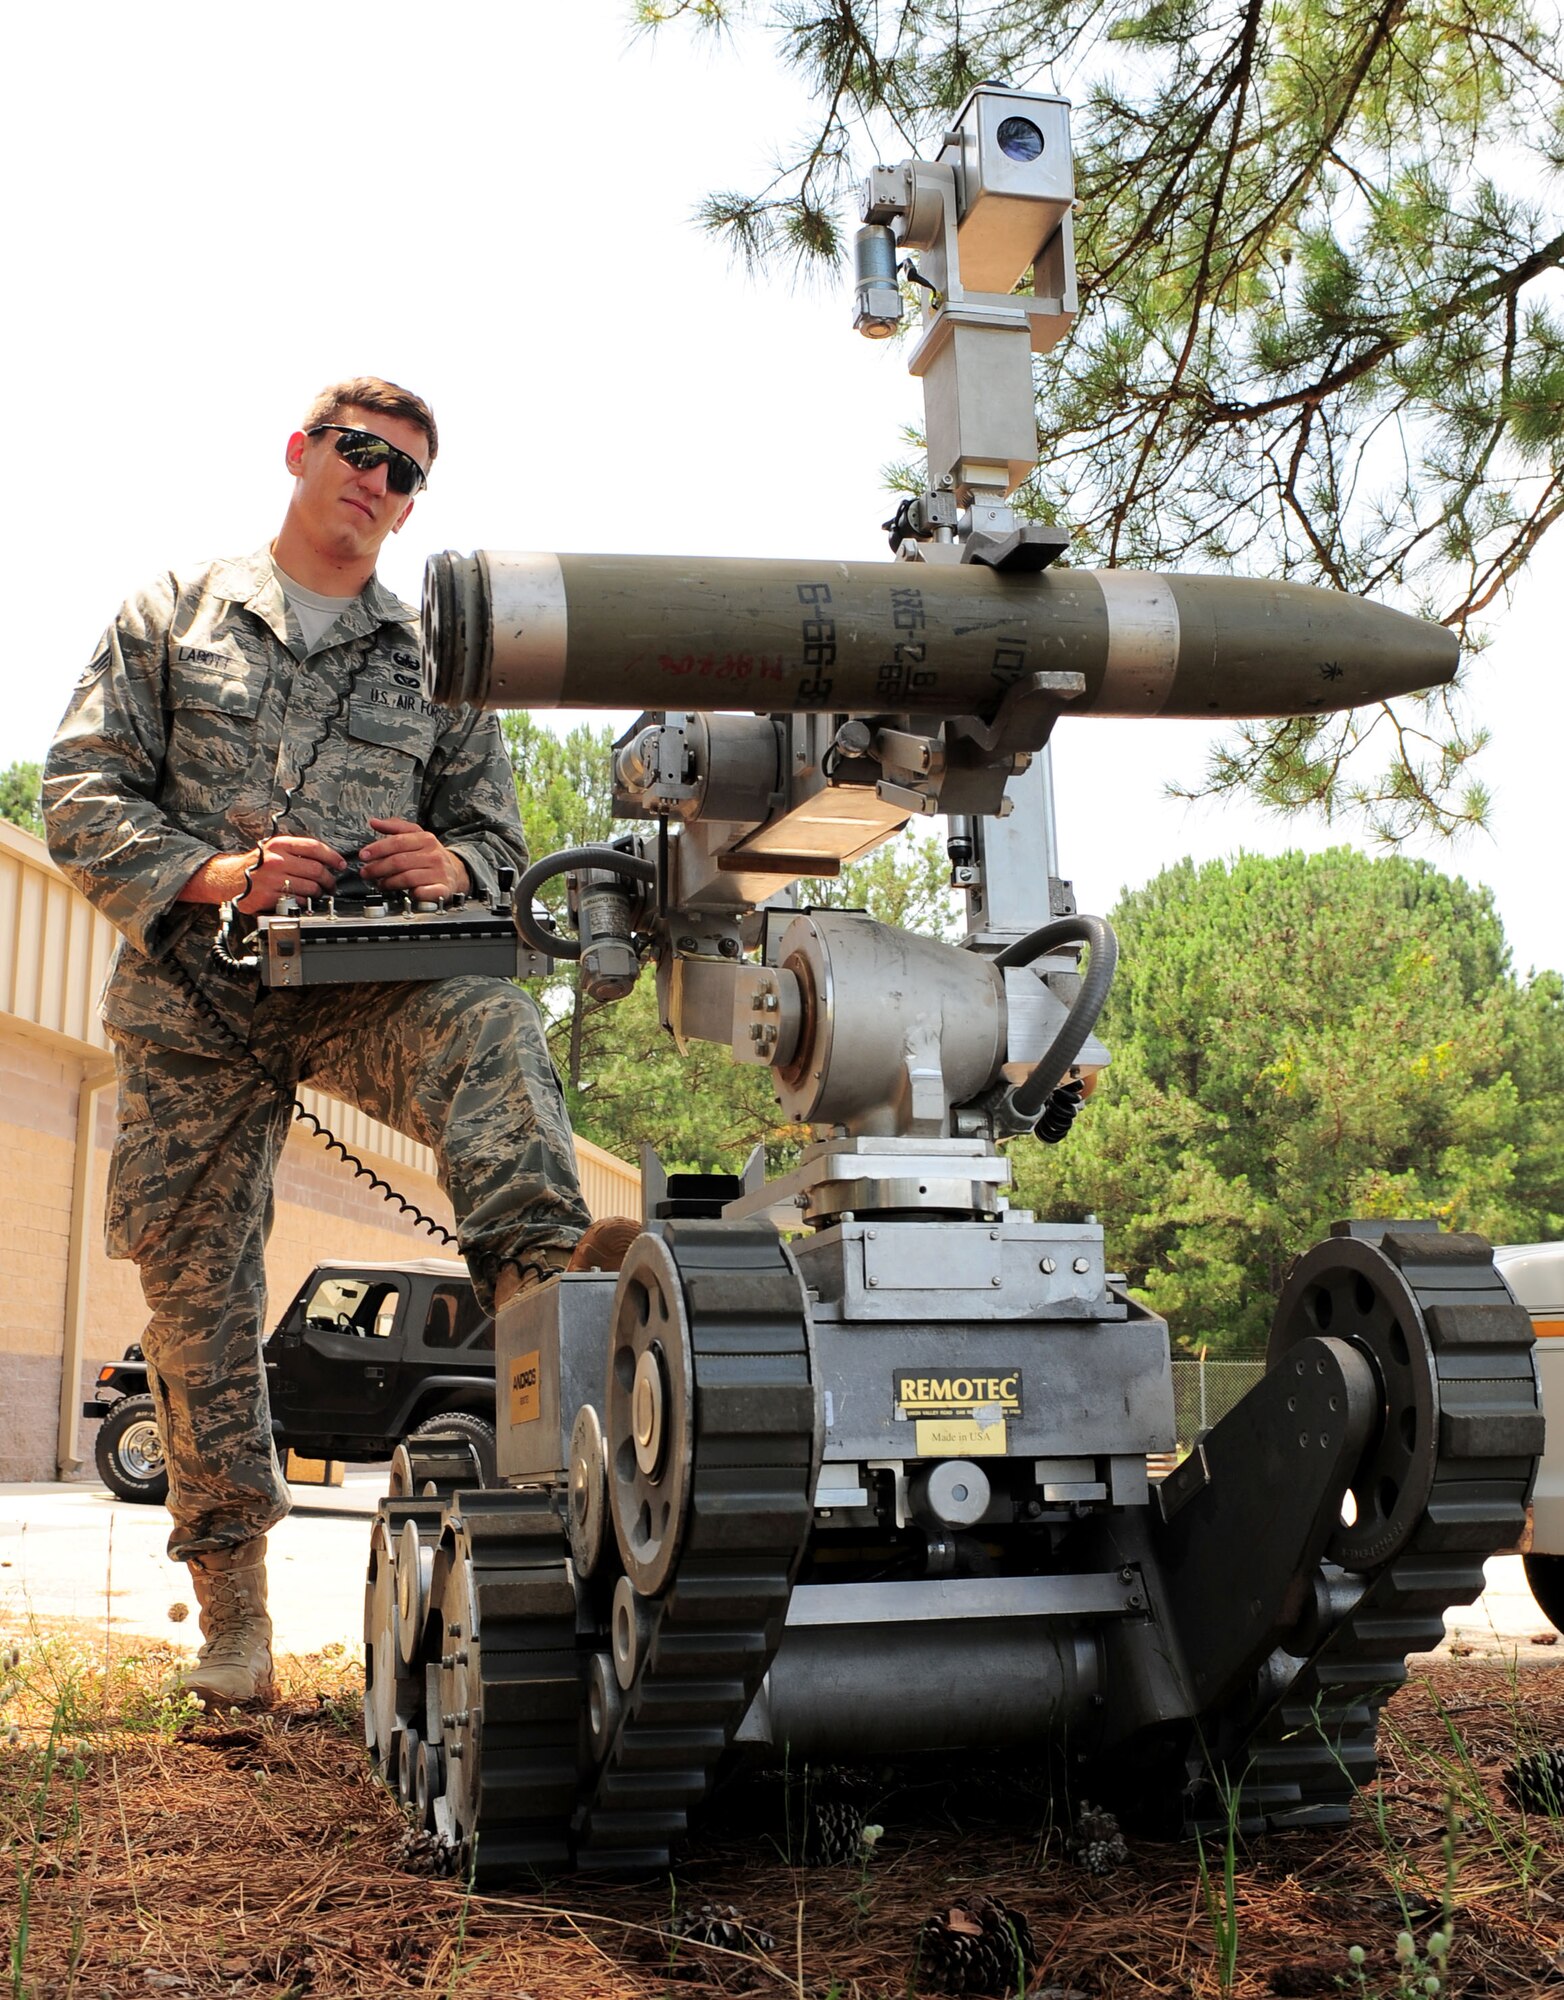 100611-F-8454M-014 SHAW AIR FORCE BASE, S.C. -- Senior Airman Joshua Labott, 20th Explosive Ordinance Disposal apprentice, shows off the capabilities of the Remote Operated Neutralizer System (RONS) June 11, 2010.  Airman Labott received the Bronze Star with the "V" for valor along with a purple heart for his actions in Afghanistan. (U.S. Air Force Photo/ Senior Airman David Minor)